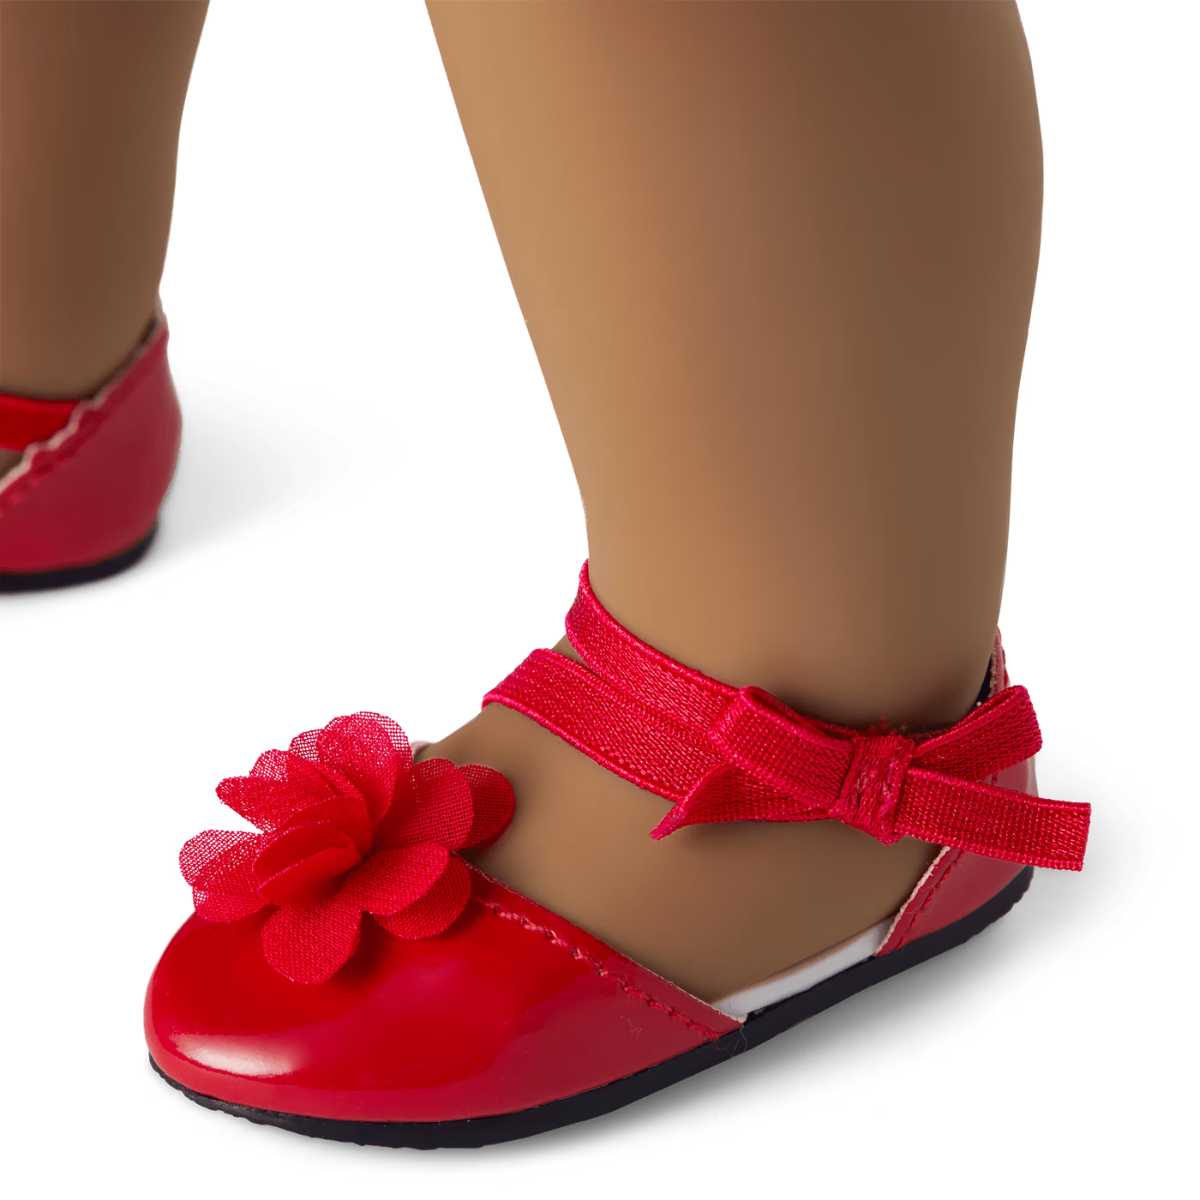 American Girl x Janie and Jack Rose Bow Flats for 18-inch Dolls - Simon's Collectibles